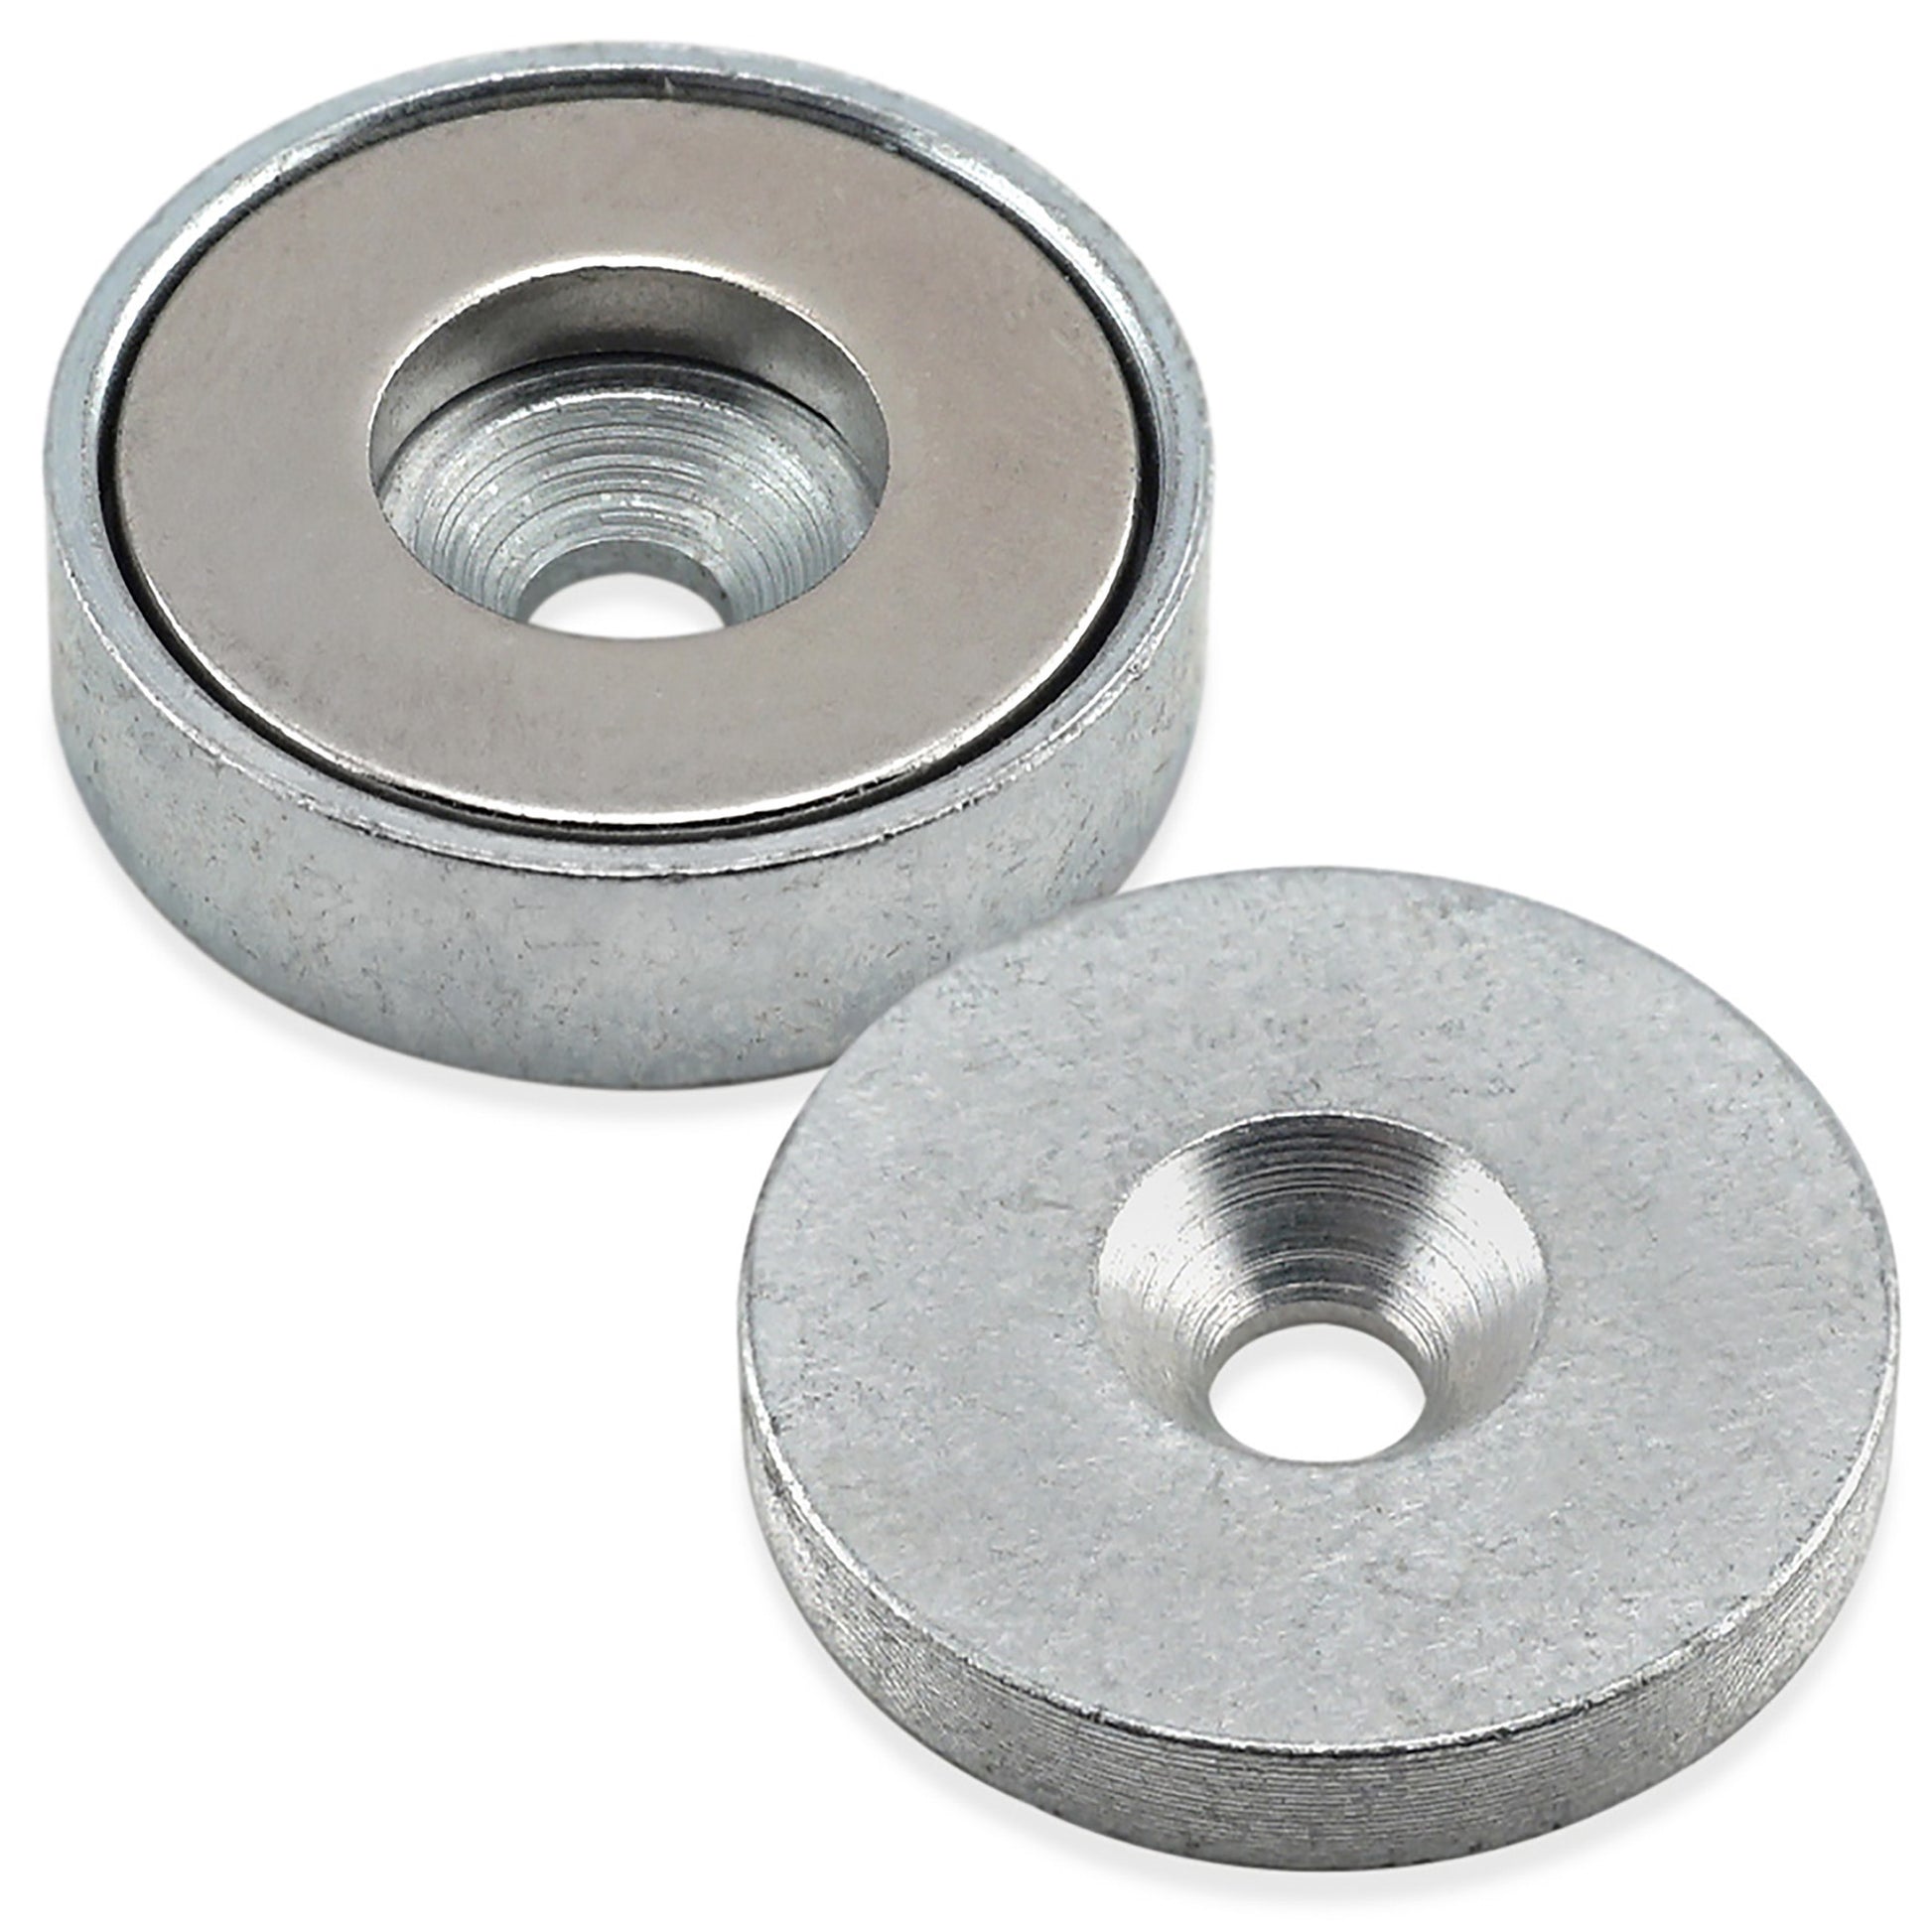 Load image into Gallery viewer, 07574 Neodymium Latch Magnet Kit (1 set) - 45 Degree Angle View